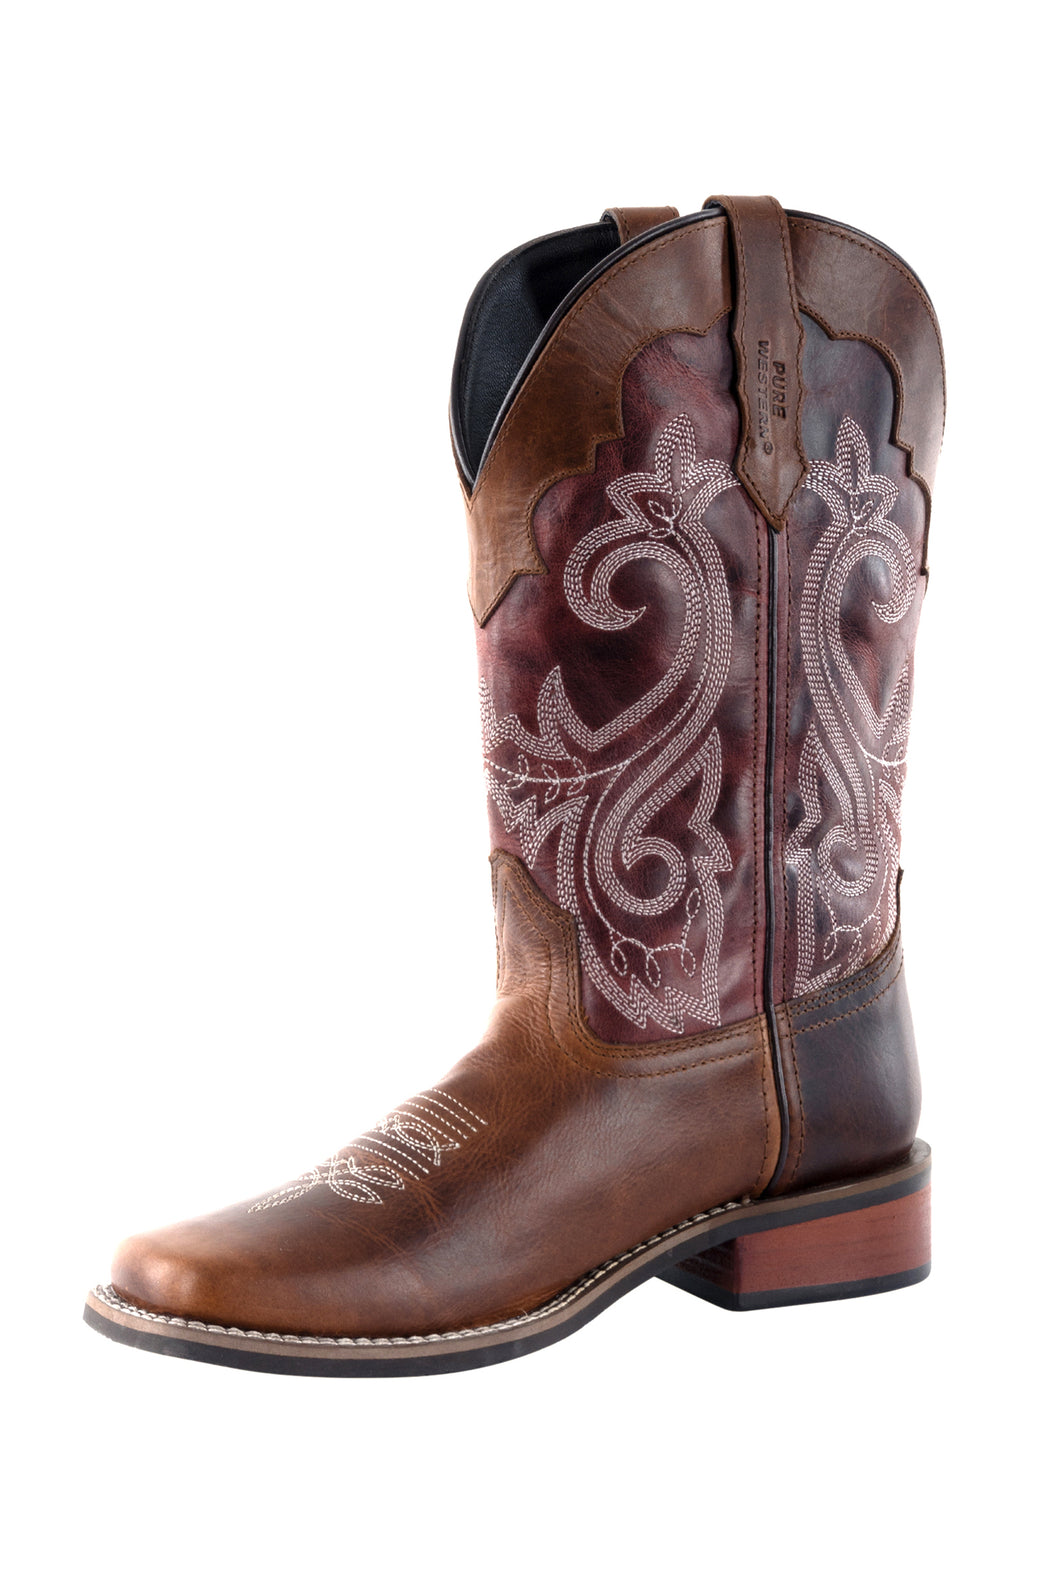 PURE WESTERN TEXAS BOOT